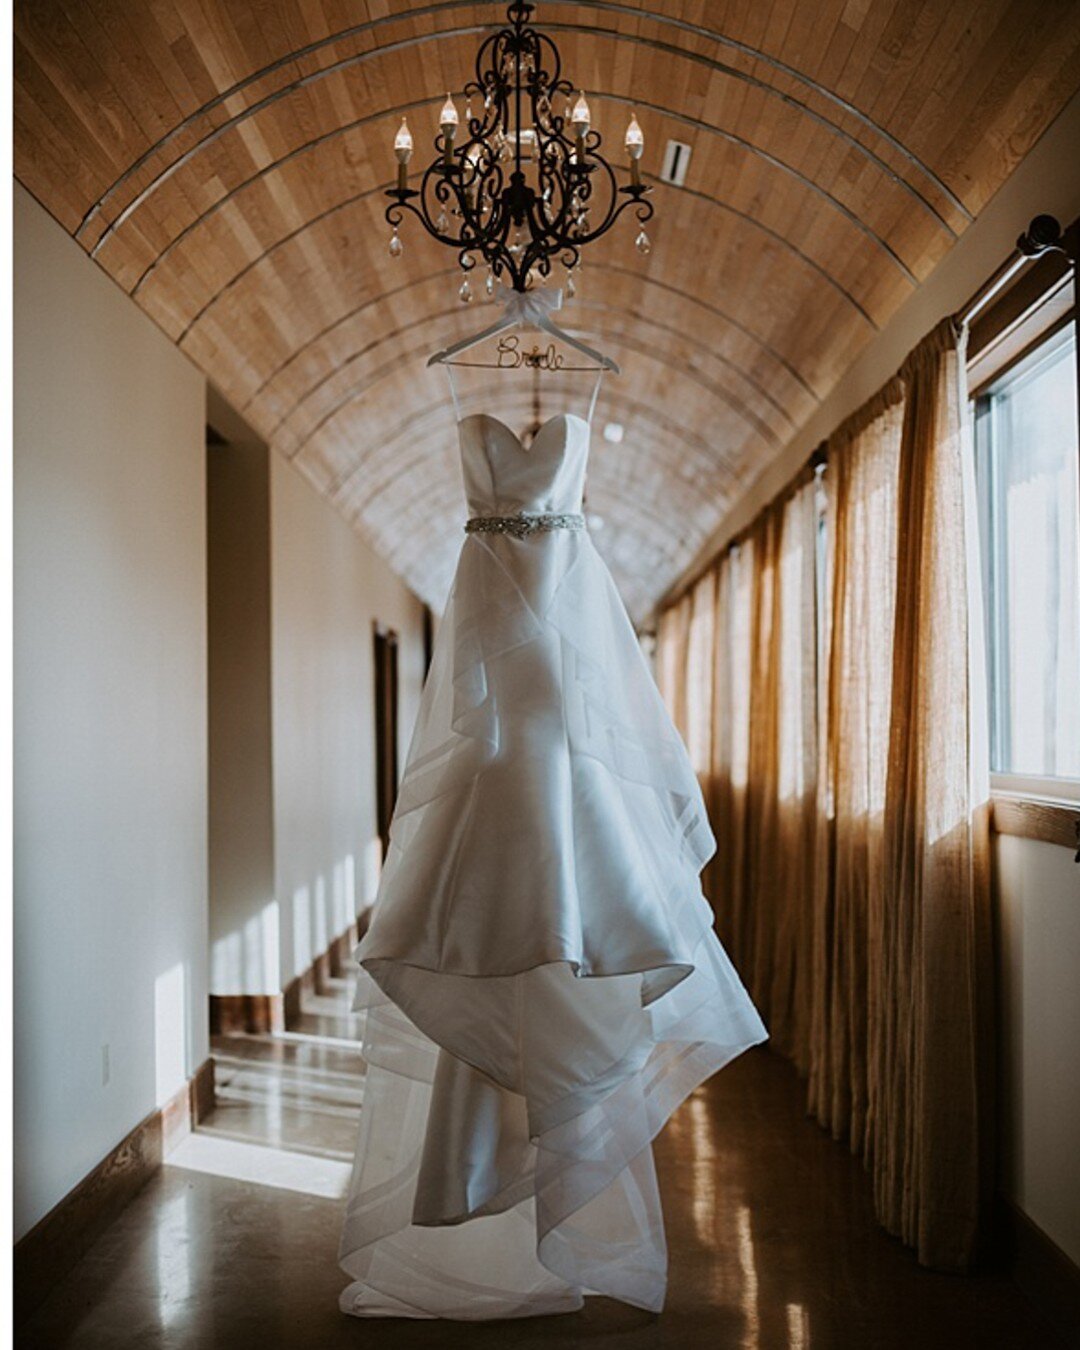 March may bring temperamental weather, but no matter the cold, rain, or even snow, our winery has a cozy, enchanting atmosphere that remains perfect for your wedding, come what may. ❄️💍 Embrace the beauty within as you celebrate the warmth of your l